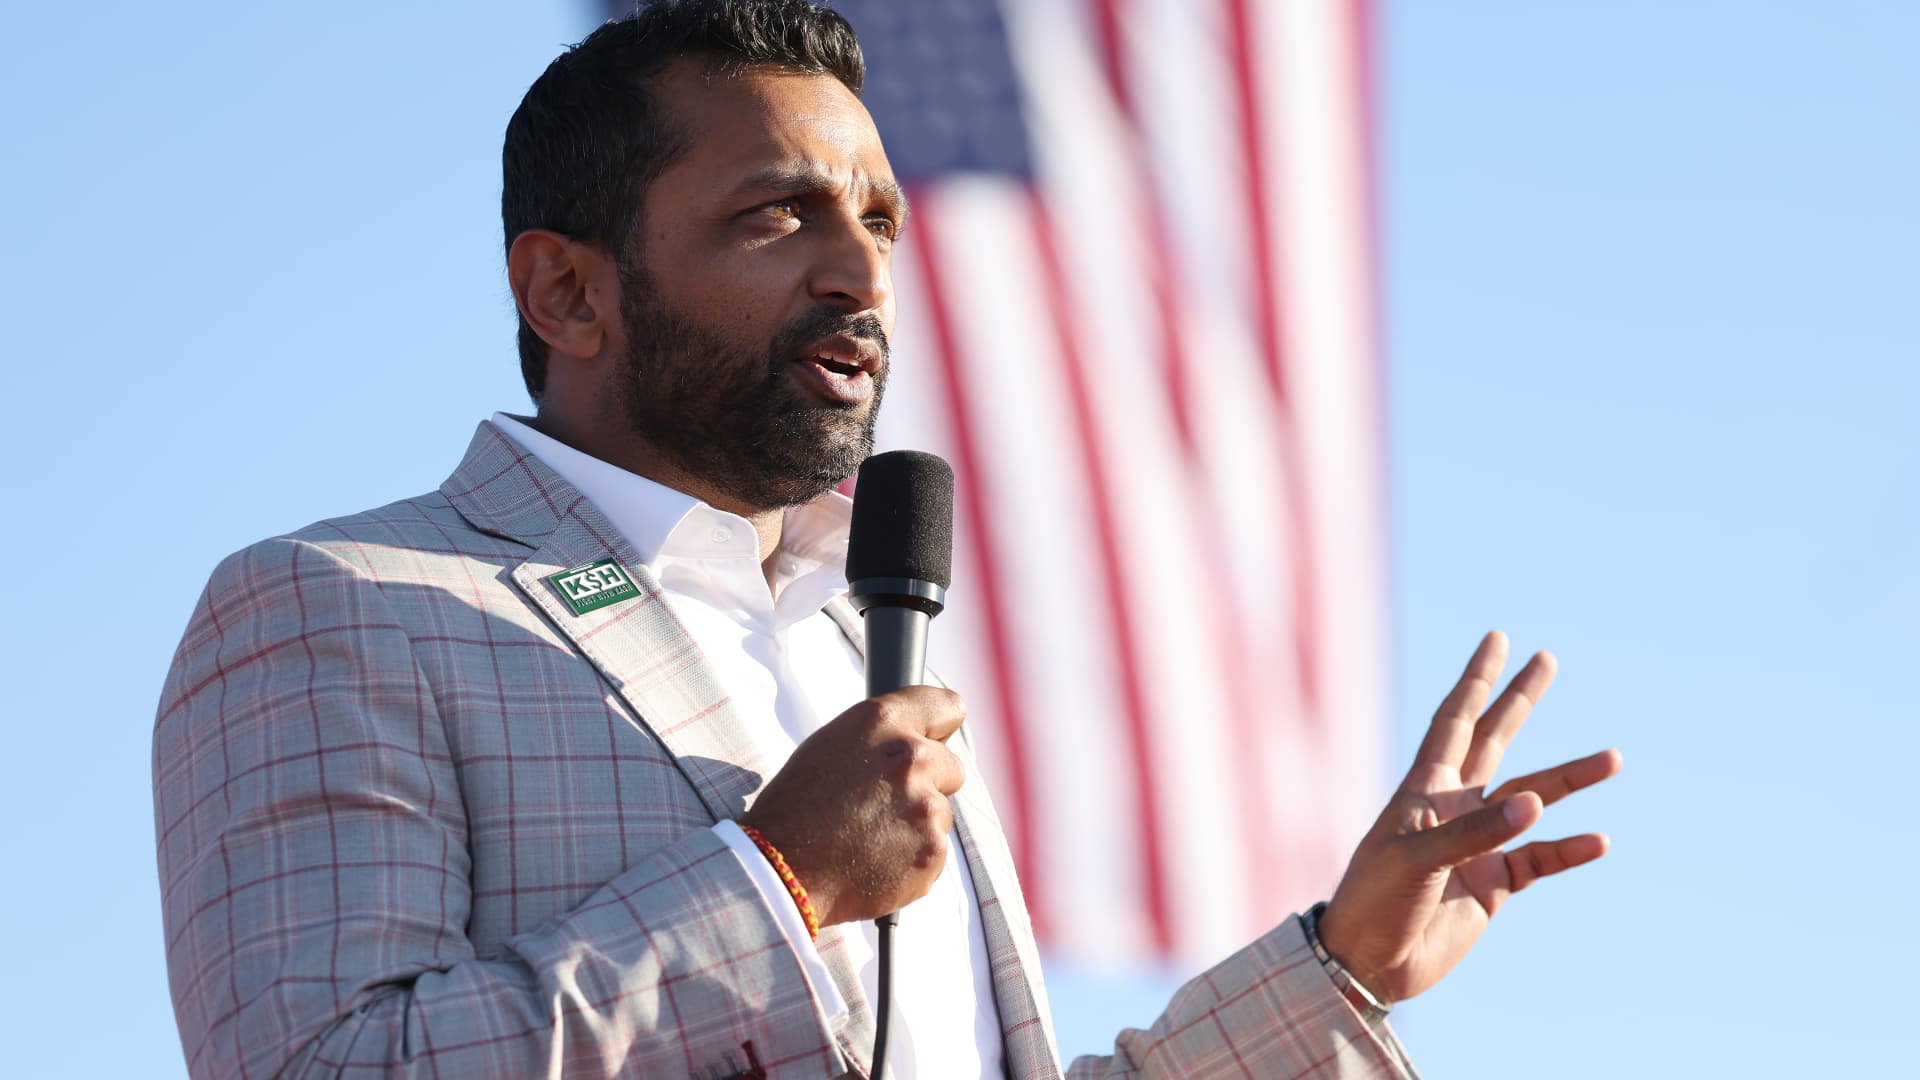 Former Chief of Staff to the Department of Defense Kash Patel speaks during a campaign rally at Minden-Tahoe Airport on October 08, 2022 in Minden, Nevada.